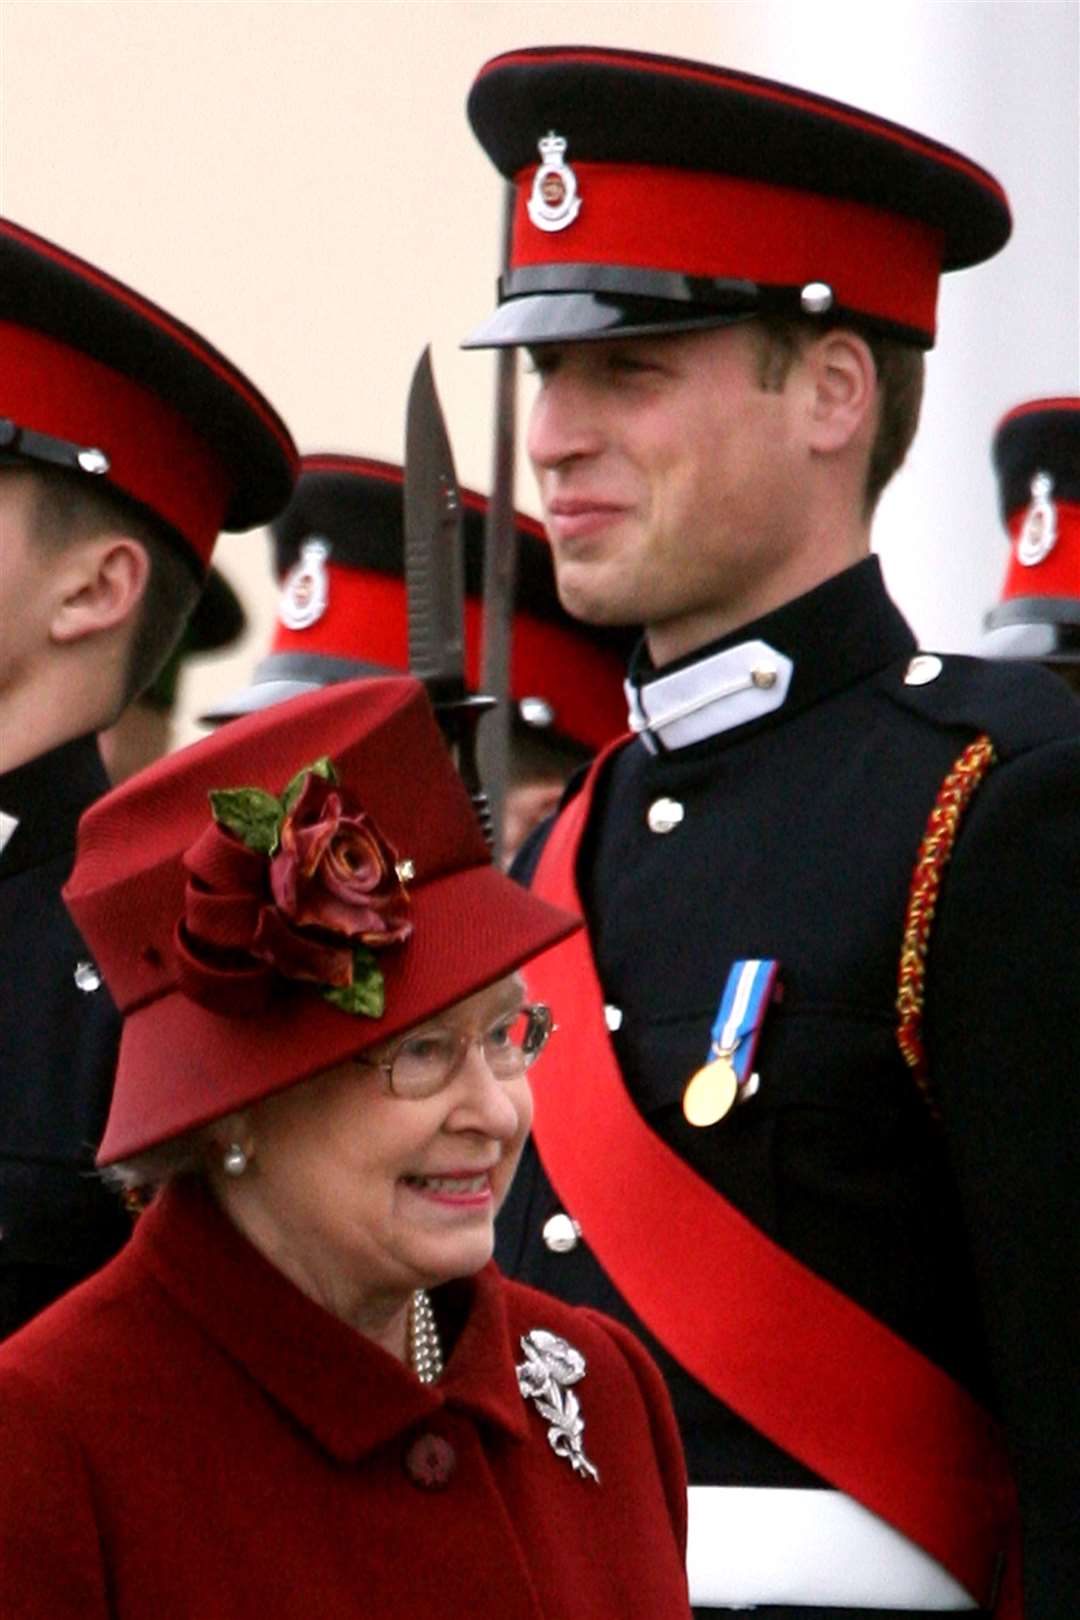 The Queen inspects the graduates, including Prince William, in the Sovereign’s Parade at Sandhurst in 2006 (Lewis Whyld/PA)